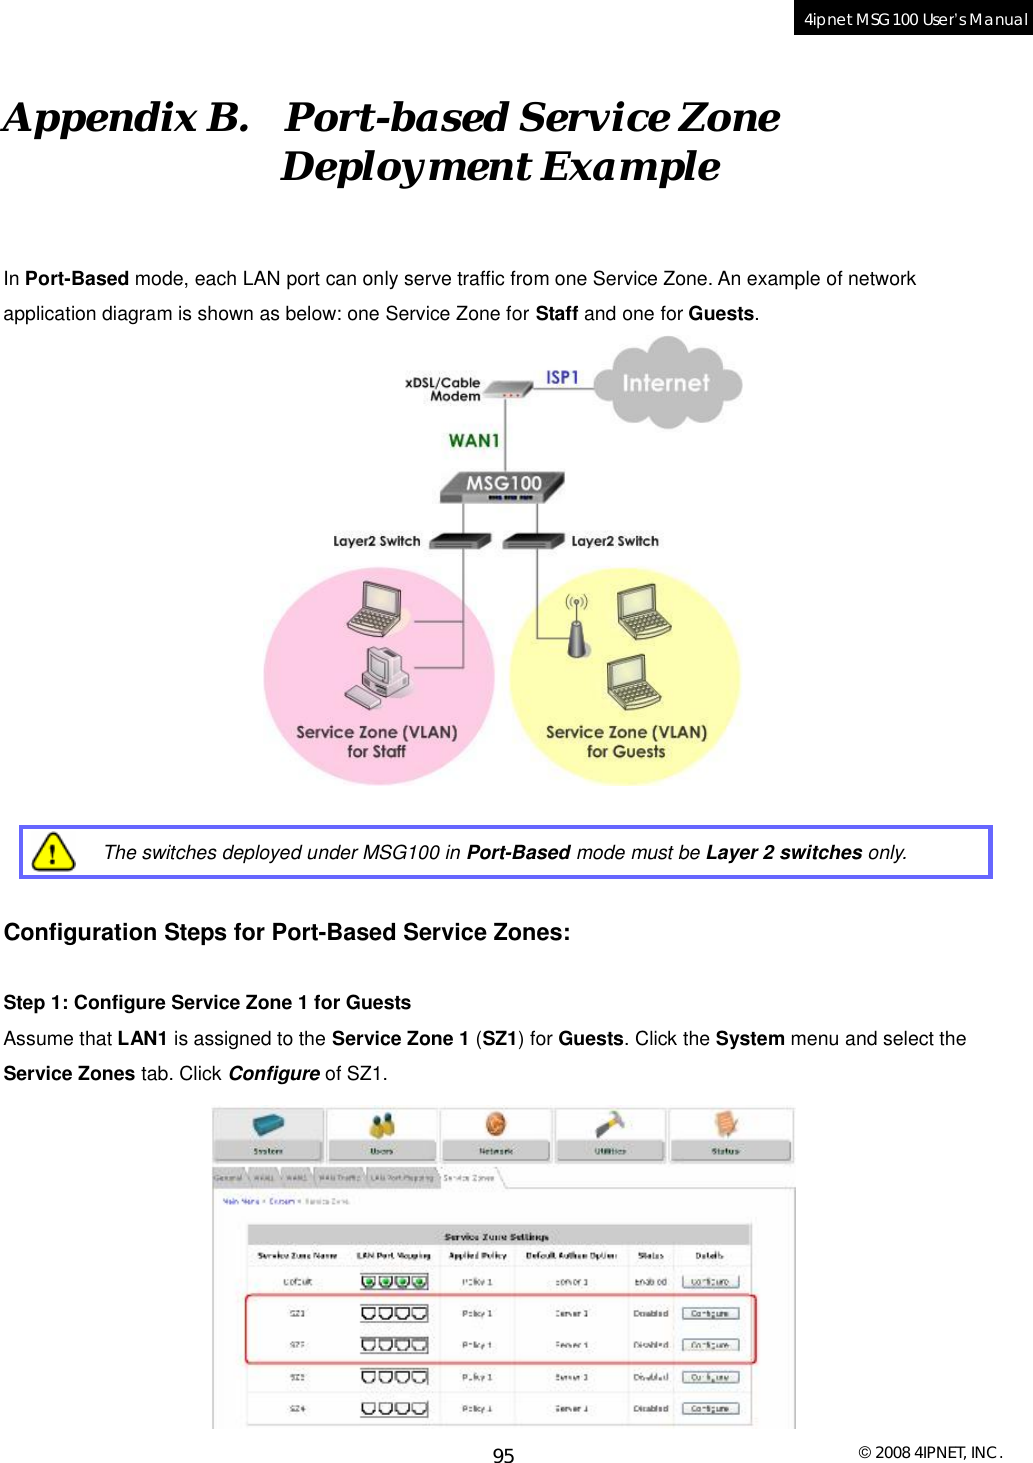  © 2008 4IPNET, INC. 95 4ipnet MSG100 User’s Manual  Appendix B.  Port-based Service Zone                             Deployment Example In Port-Based mode, each LAN port can only serve traffic from one Service Zone. An example of network application diagram is shown as below: one Service Zone for Staff and one for Guests.    The switches deployed under MSG100 in Port-Based mode must be Layer 2 switches only.  Configuration Steps for Port-Based Service Zones:  Step 1: Configure Service Zone 1 for Guests Assume that LAN1 is assigned to the Service Zone 1 (SZ1) for Guests. Click the System menu and select the Service Zones tab. Click Configure of SZ1.  